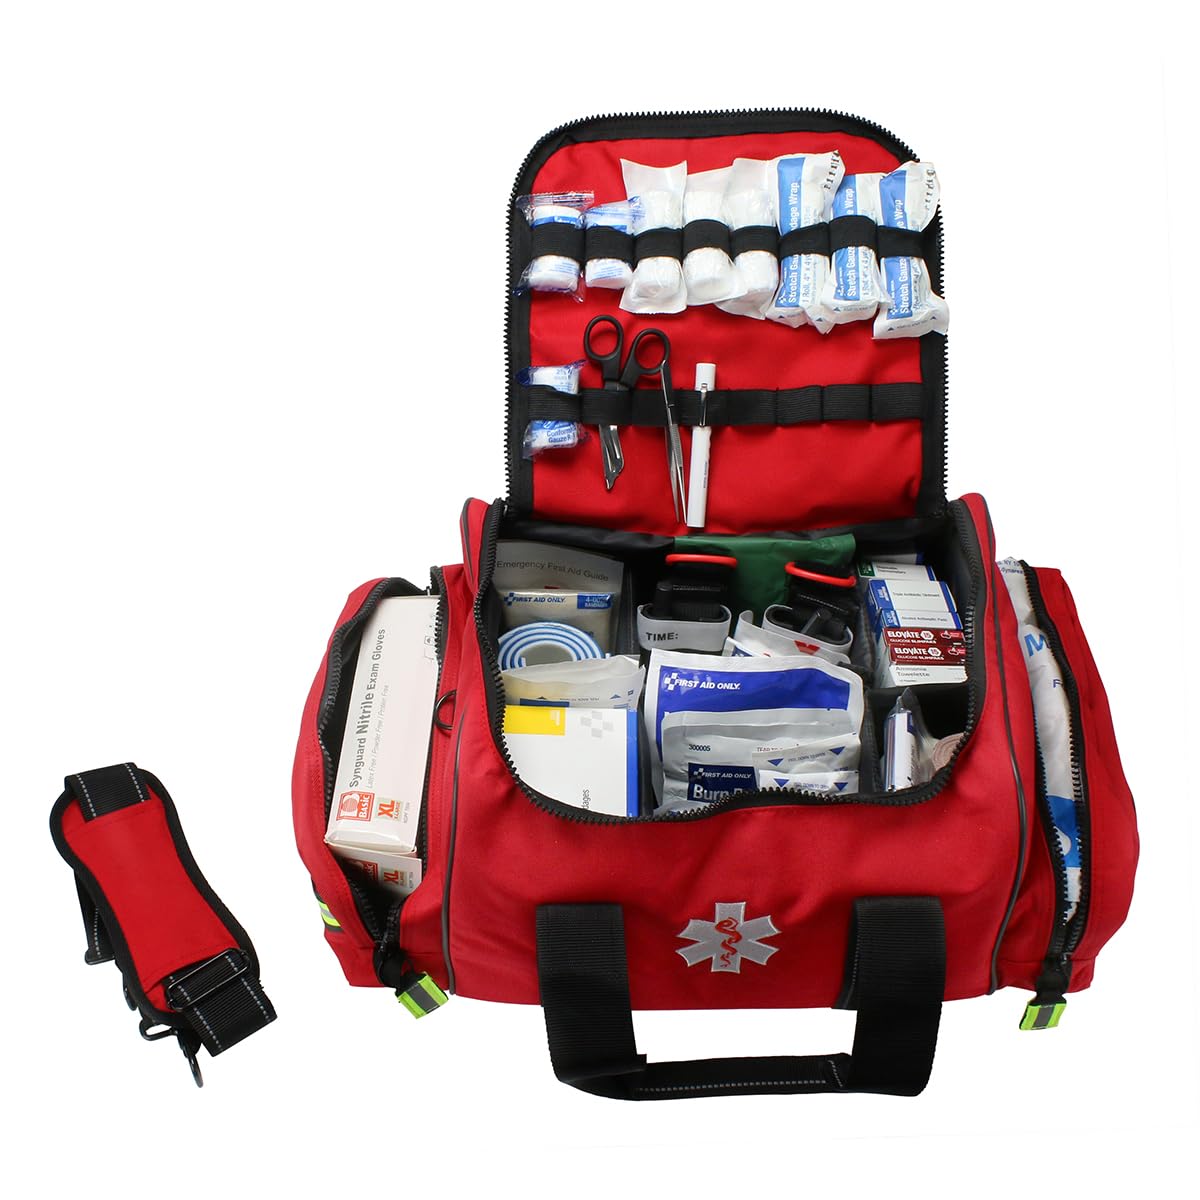 First Aid Only 91484 Basic First Aid Kit First Responder Bag with Bleed Control, 335 Pieces